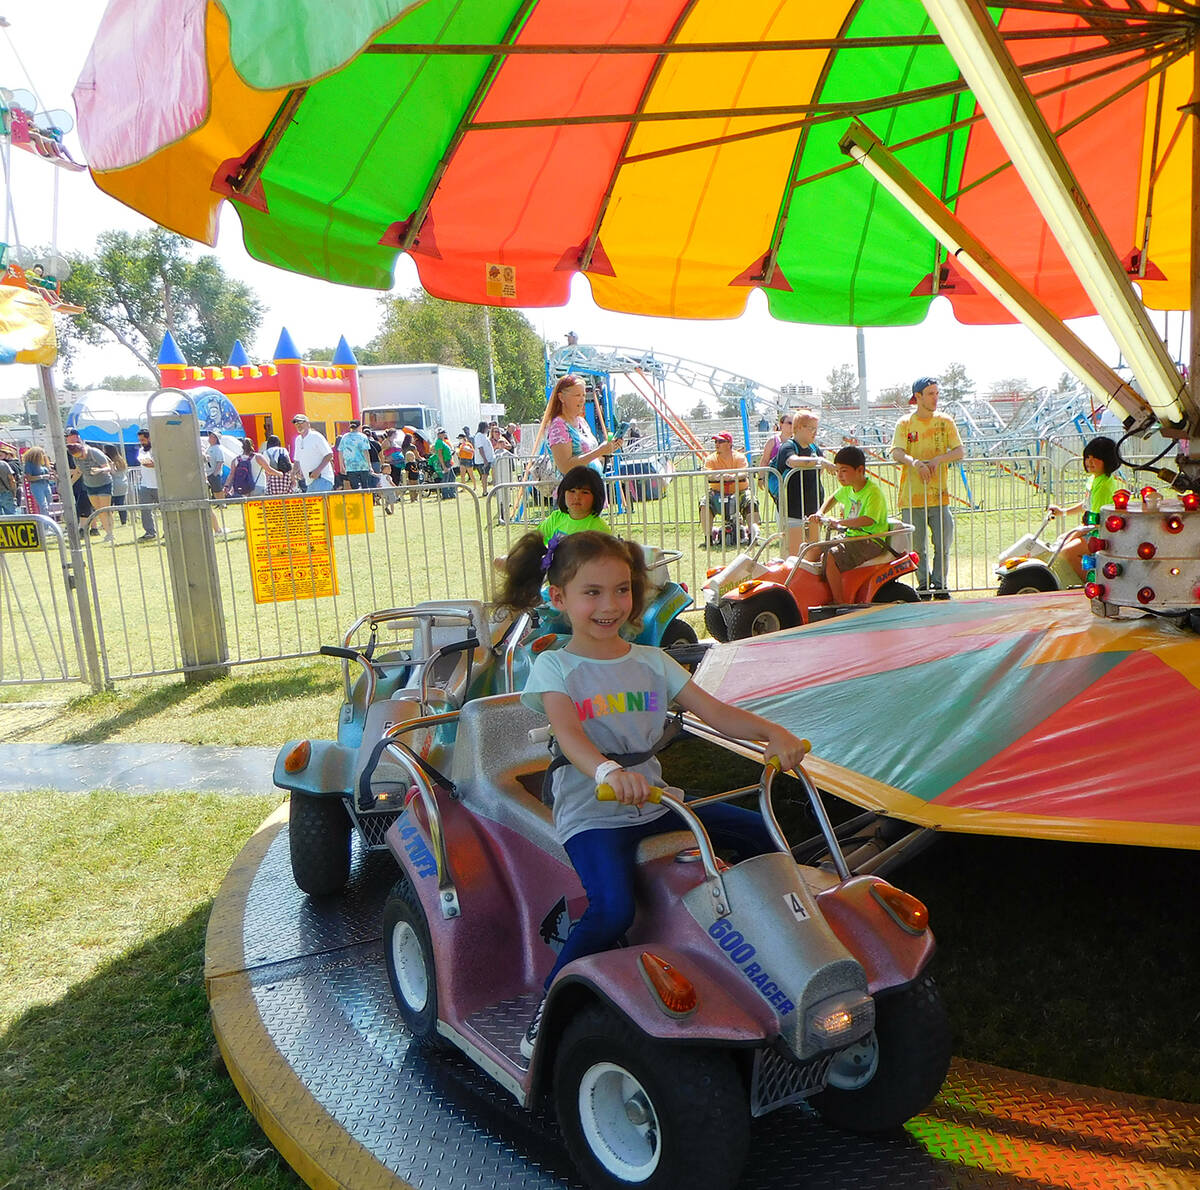 Robin Hebrock/Pahrump Valley Times With a bright smile on her face, a young Fall Festival atten ...